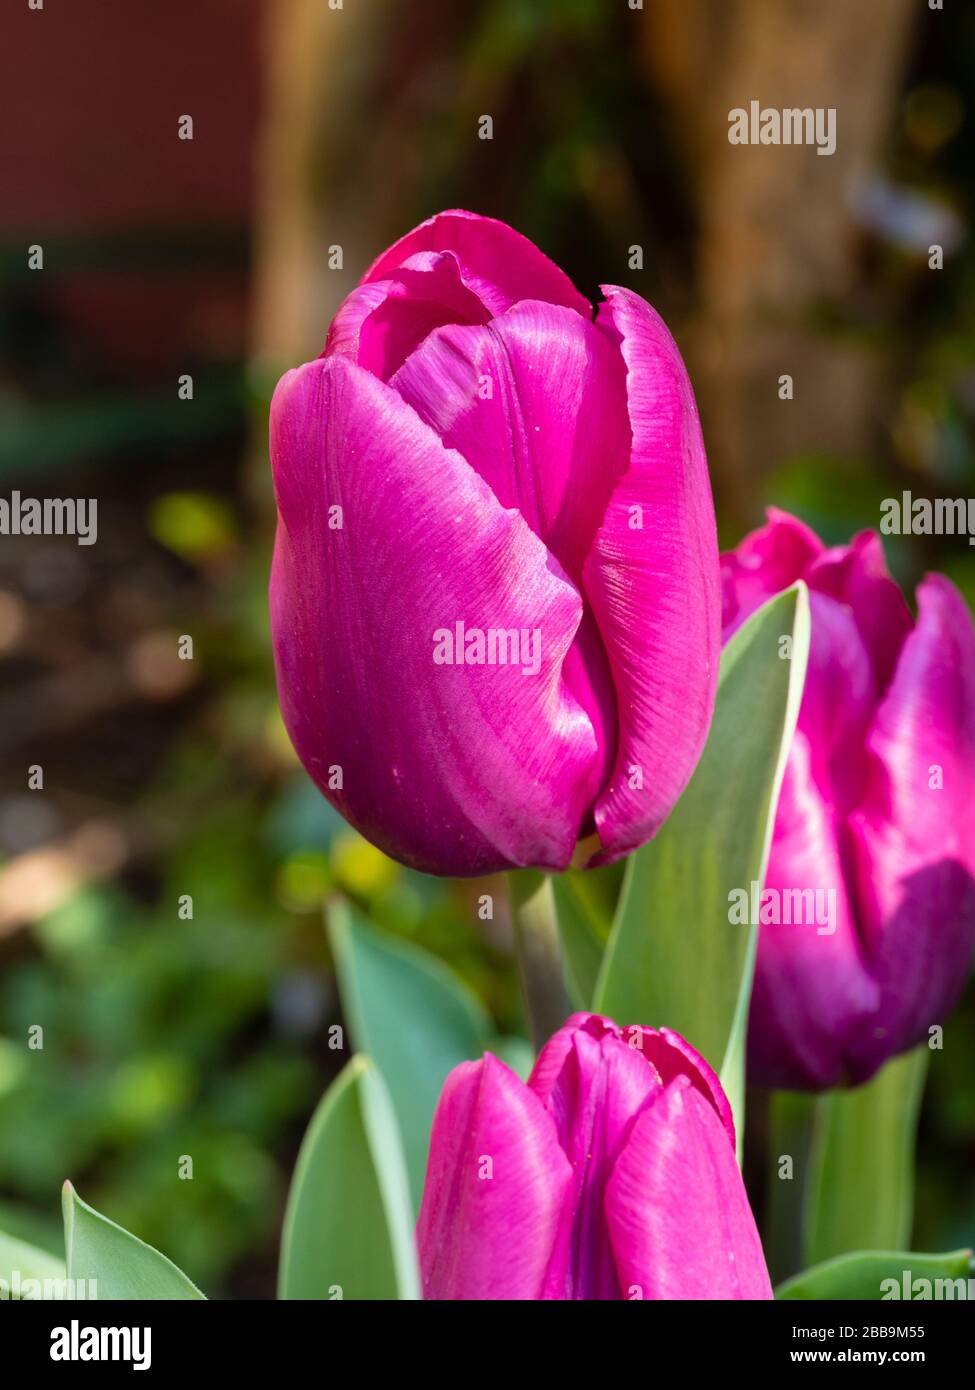 Classic vase shaped mid spring rose violet flower of the hardy bulb, Tulip 'Blue Beauty' Stock Photo